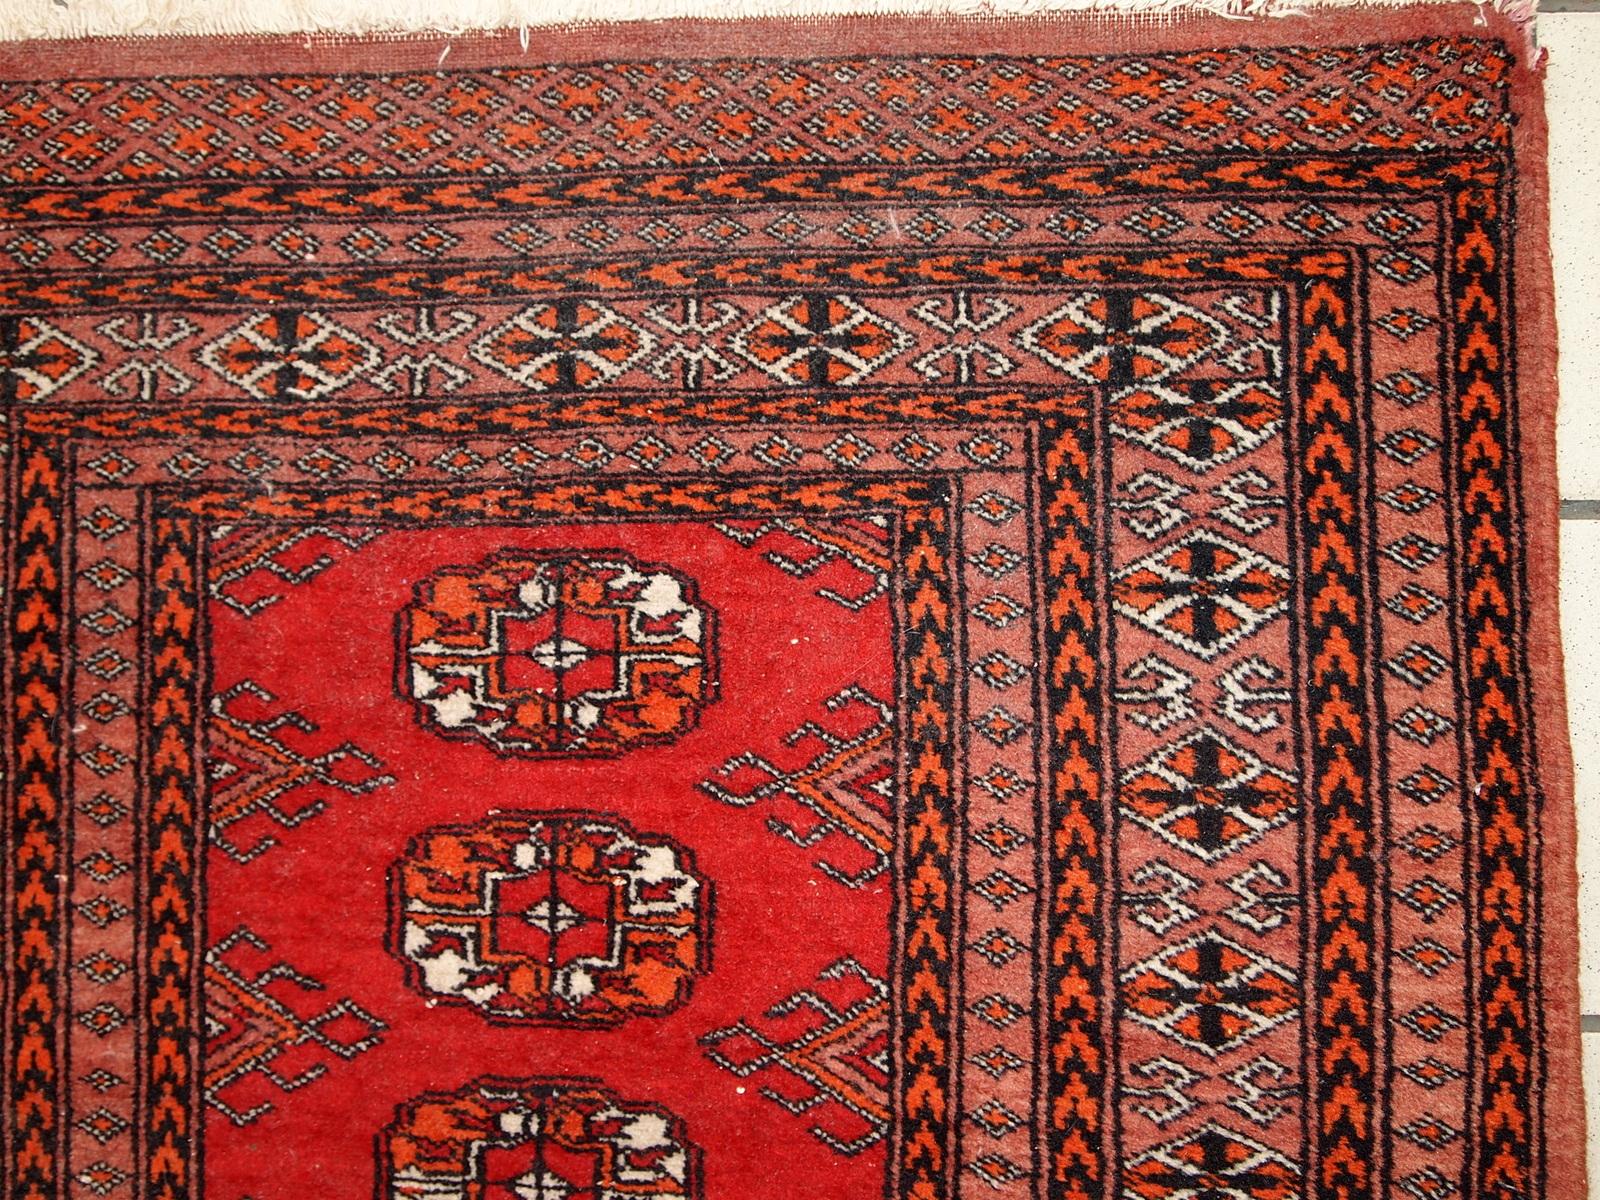 Vintage handmade Pakistani Lahore rug in original good condition. The rug has been made in wool in the middle of 20th century.

-Condition: Original good,

-circa 1960s,

-Size: 2.6' x 4.2' (80cm x 130cm),

-Material: Wool,

-Country of